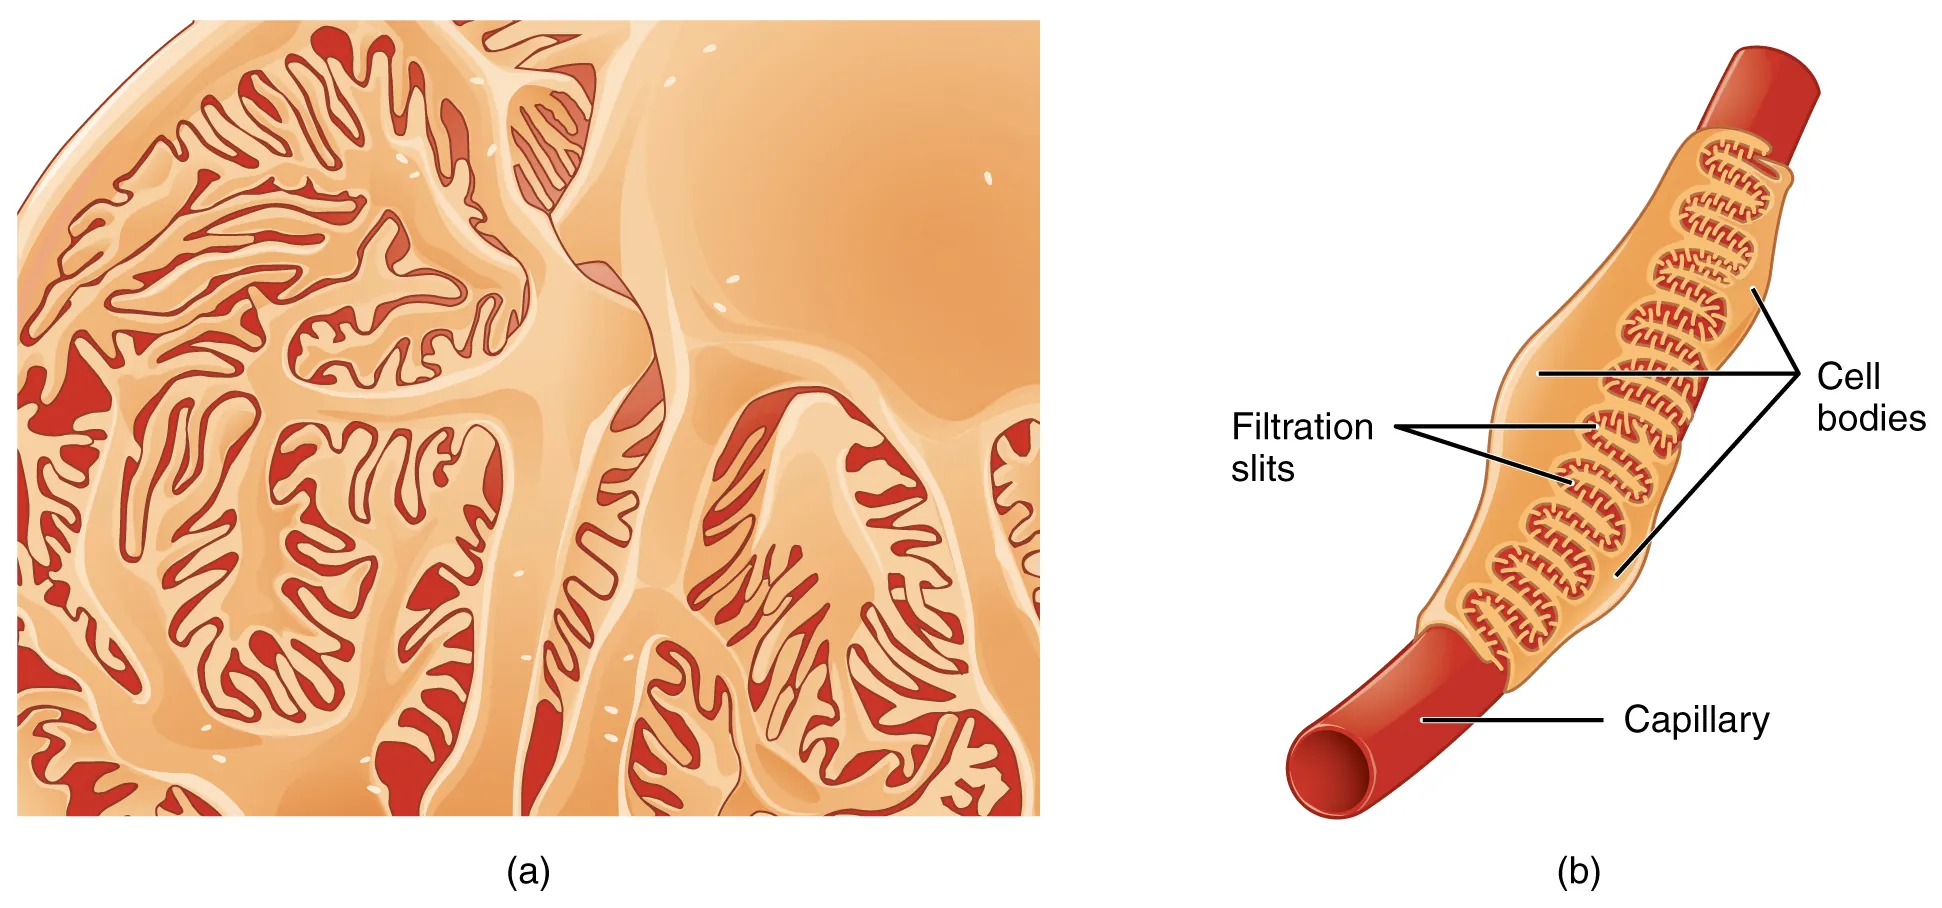 The left panel of this figure shows an image of a podocyte. The right panel shows a tube-like structure that illustrates the filtration slits and the cell bodies.